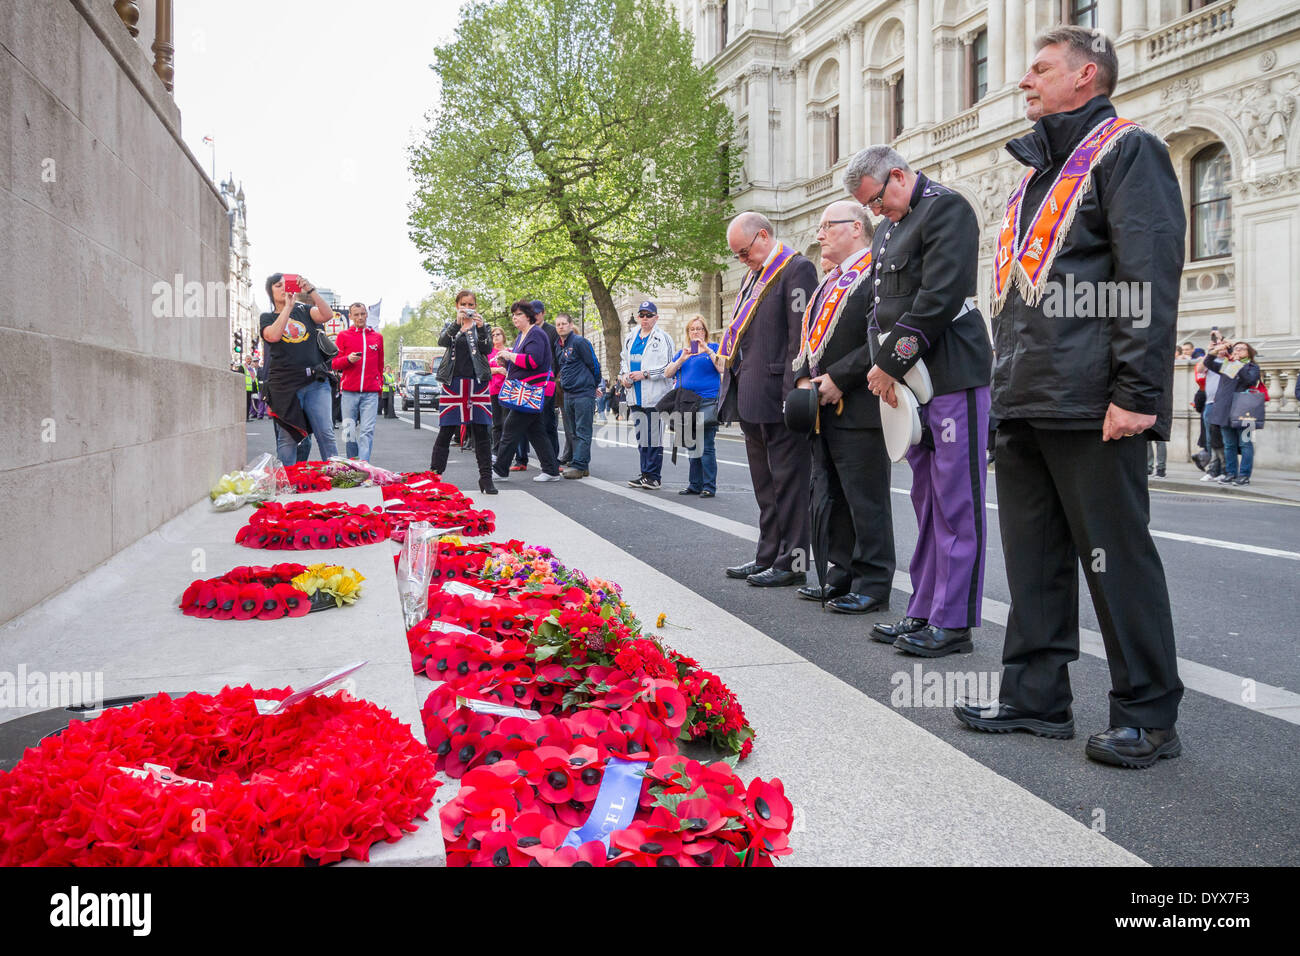 London, UK. 26th Apr, 2014. City of London District St. George’s Day Orange Parade and March 2014 Credit:  Guy Corbishley/Alamy Live News Stock Photo